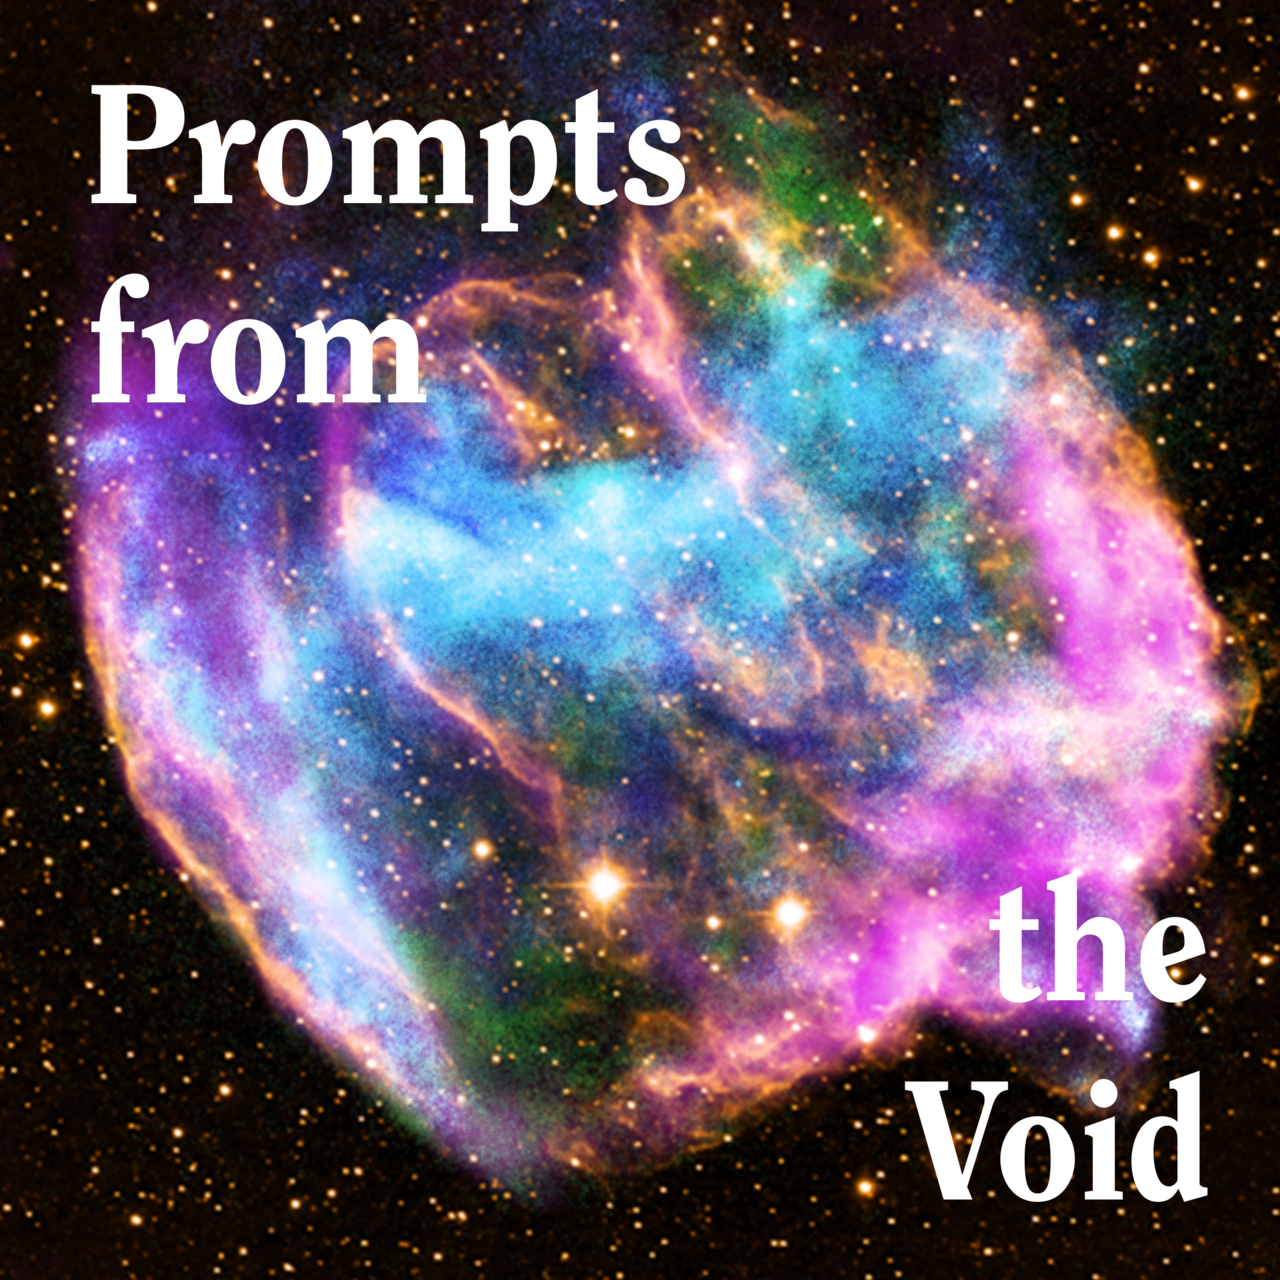 Prompts from the Void